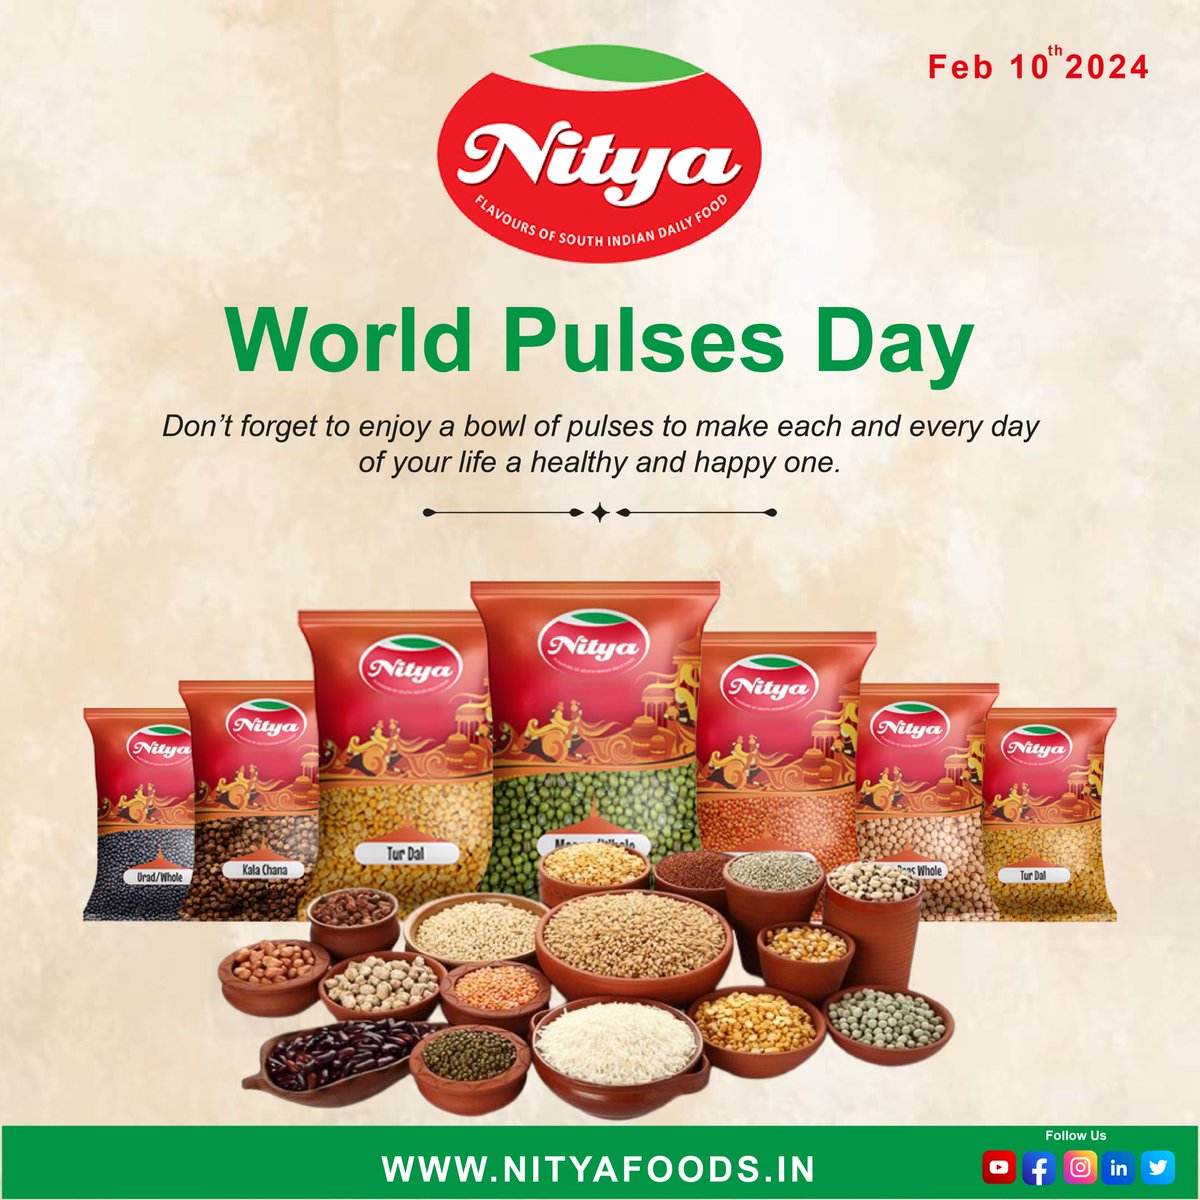 Don’t forget to enjoy a bowl of pulses to make each and every day of your life a healthy and happy one.#WorldPulsesDay 

𝐍𝐢𝐭𝐲𝐚 𝐏𝐮𝐥𝐬𝐞𝐬 - “𝐘𝐨𝐮𝐫 𝐤𝐢𝐭𝐜𝐡𝐞𝐧 𝐟𝐫𝐢𝐞𝐧𝐝”.
#nityafoods #nitya #WorldPulsesDay #pulses #southindia #southindianfood #indianfoods